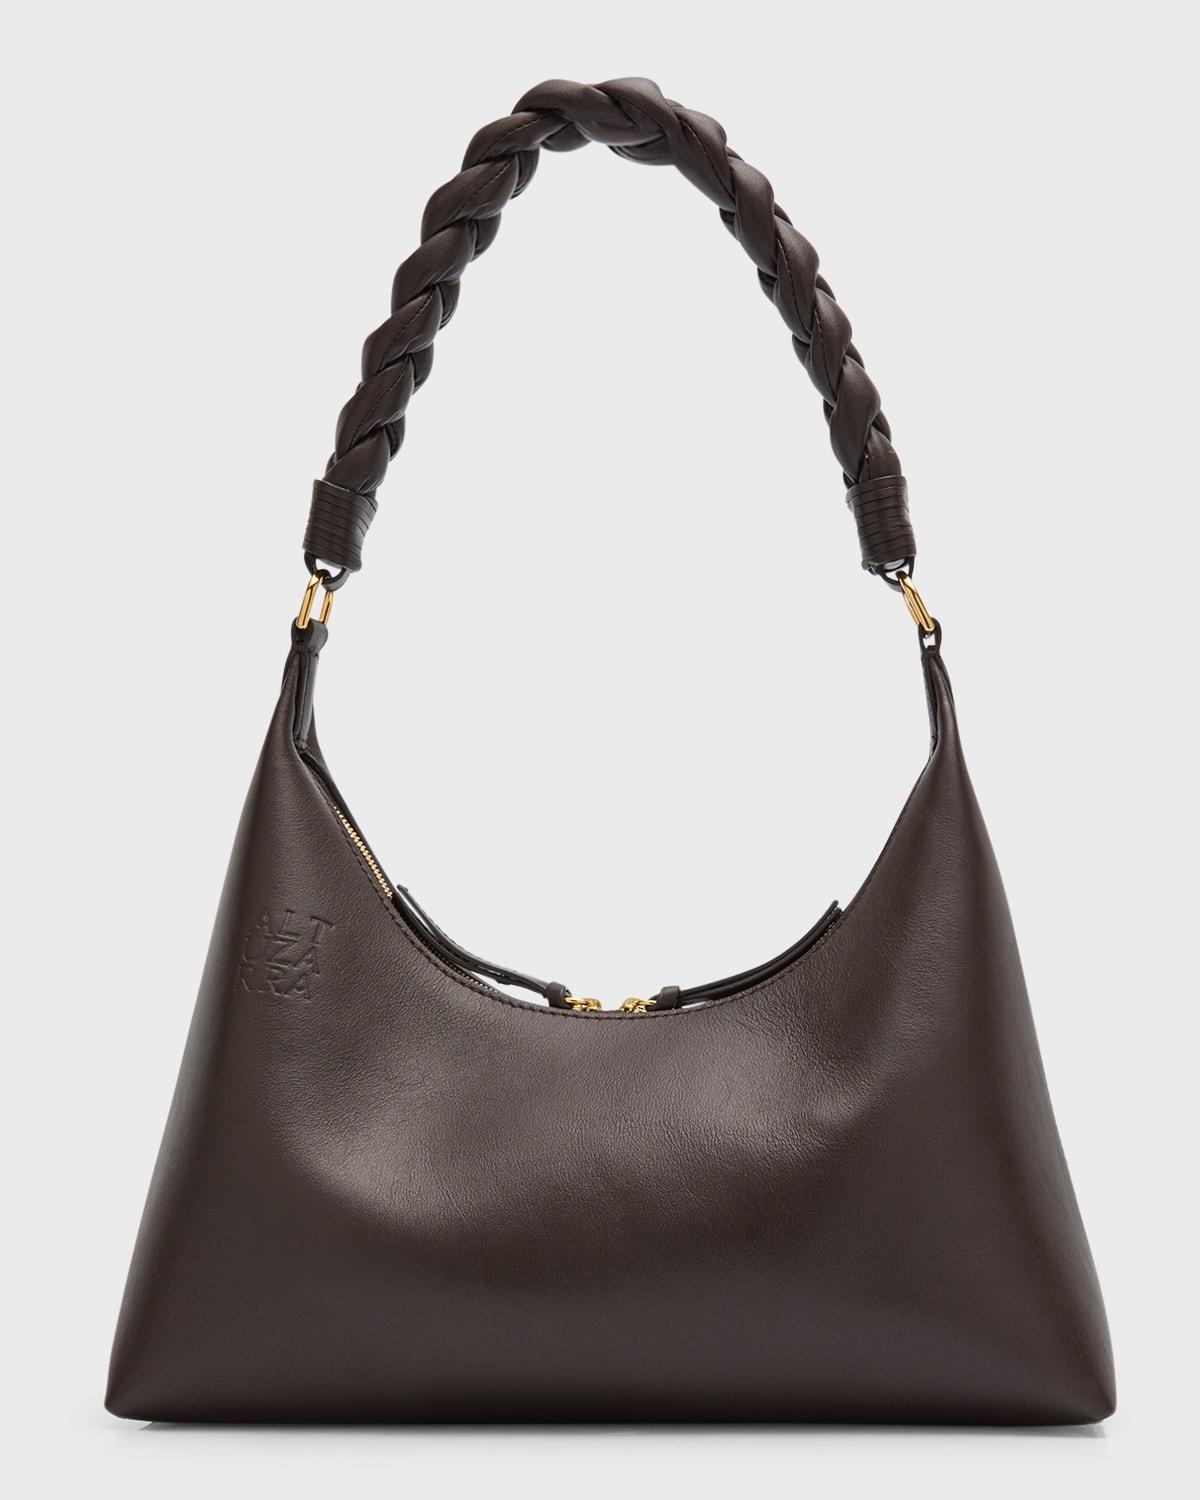 Altuzarra Small Braided Leather Hobo Bag in Brown